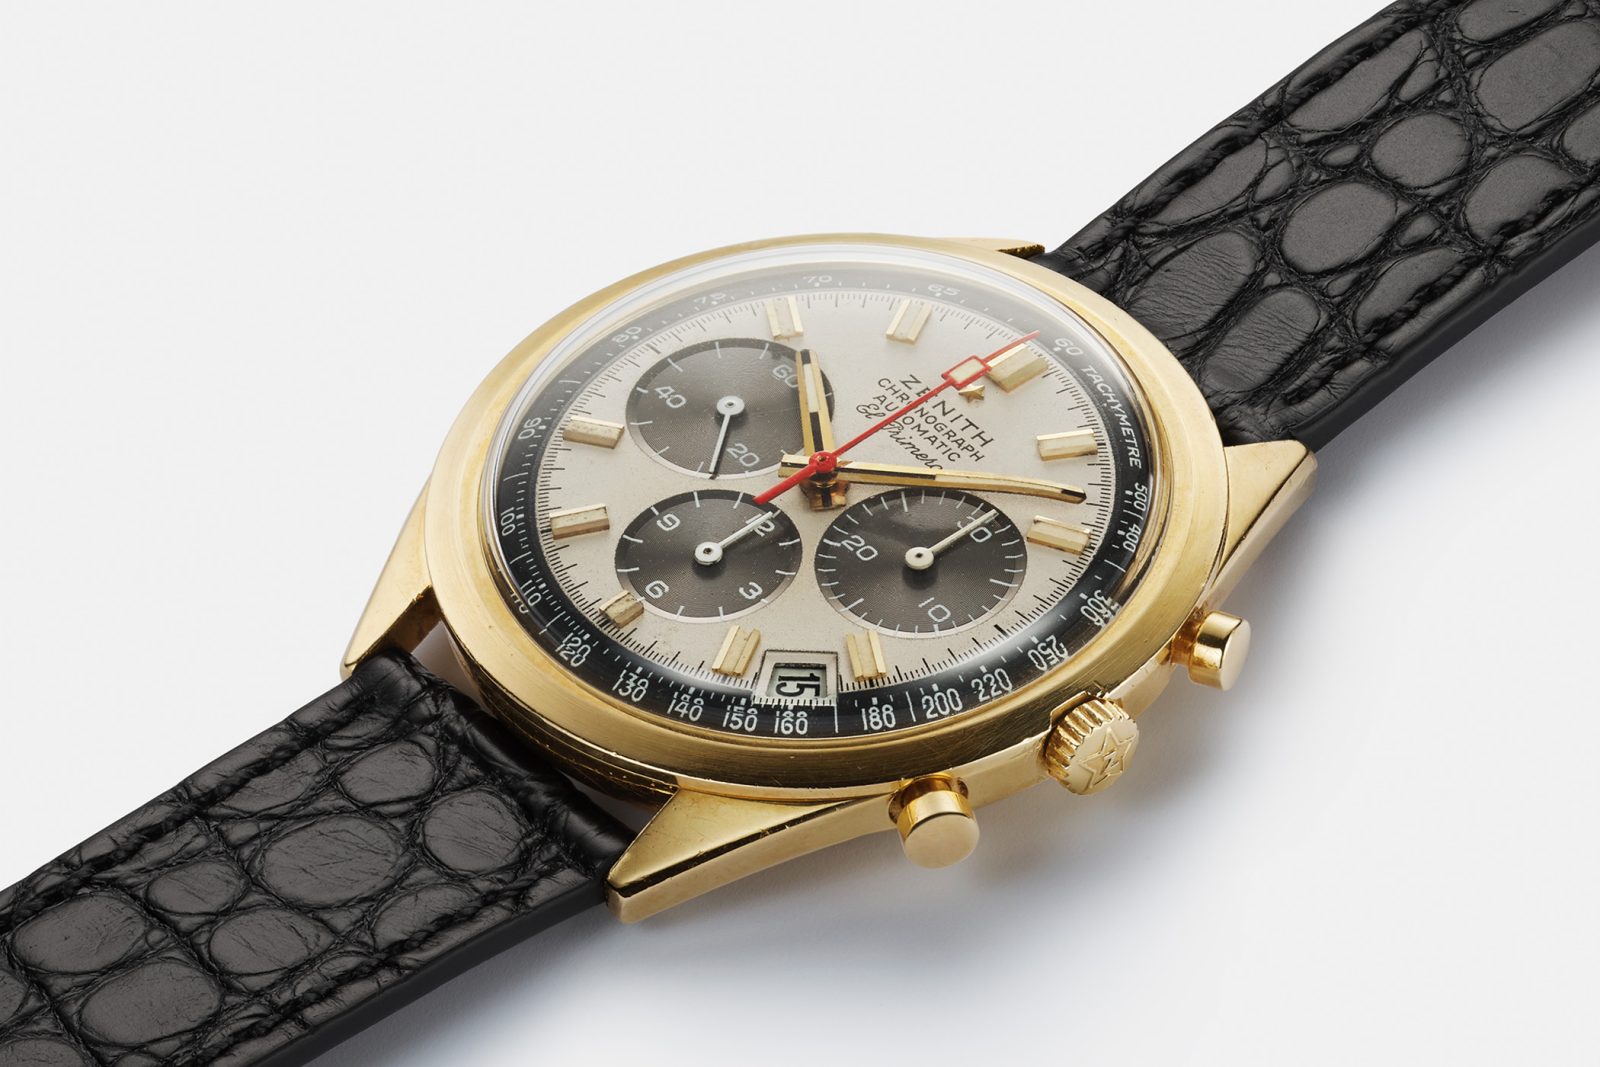 Louis Vuitton honours two decades of watchmaking with its limited edition  Tambour Twenty